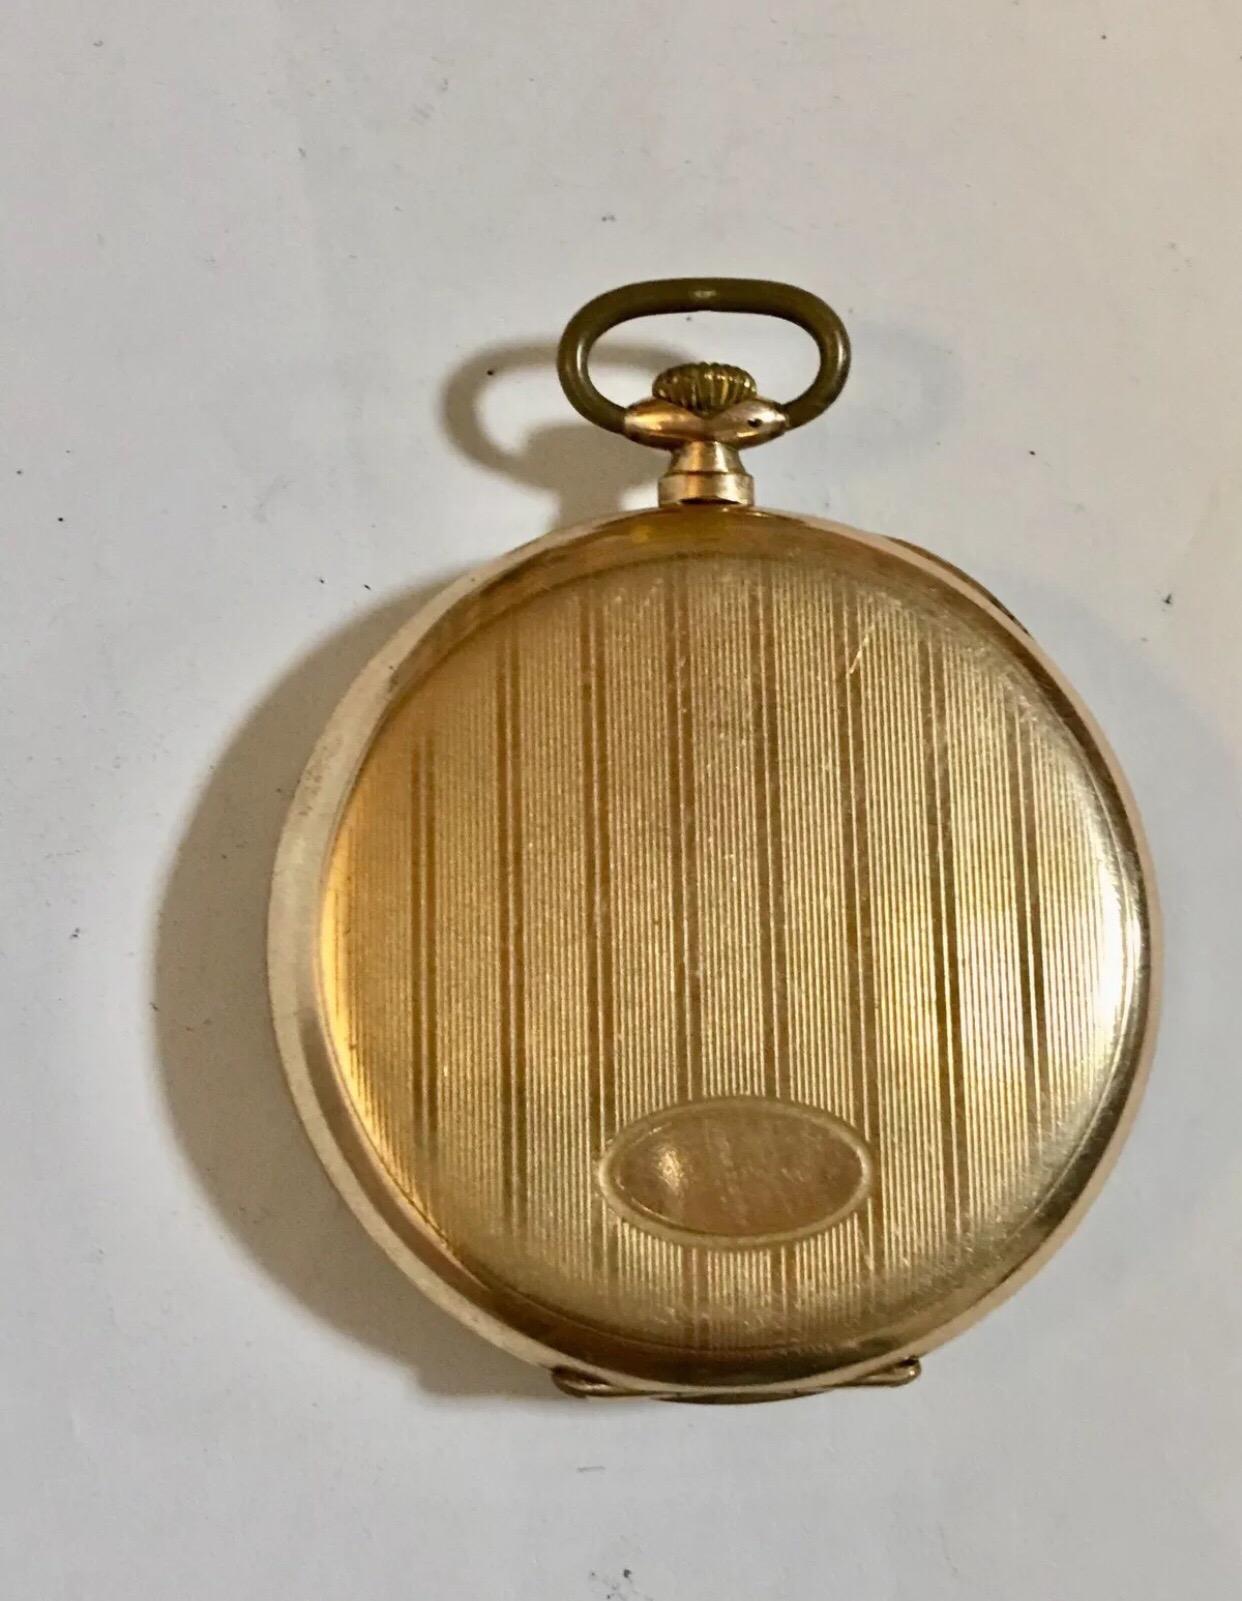 Gold-Plated Cyma Dress Pocket Watch For Sale 7